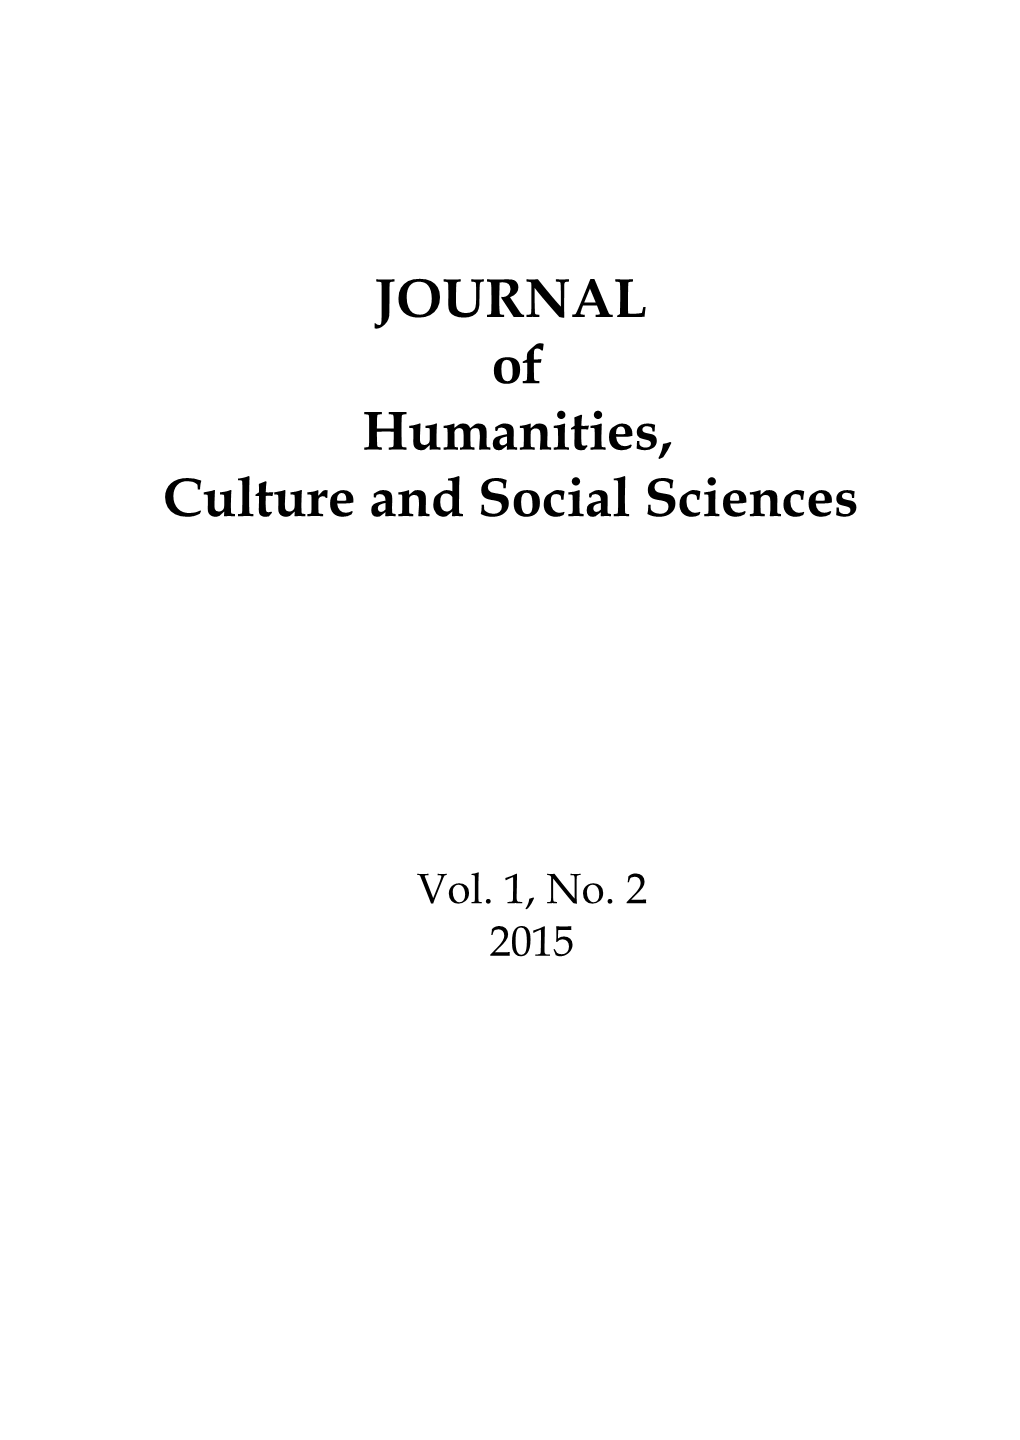 JOURNAL of Humanities, Culture and Social Sciences